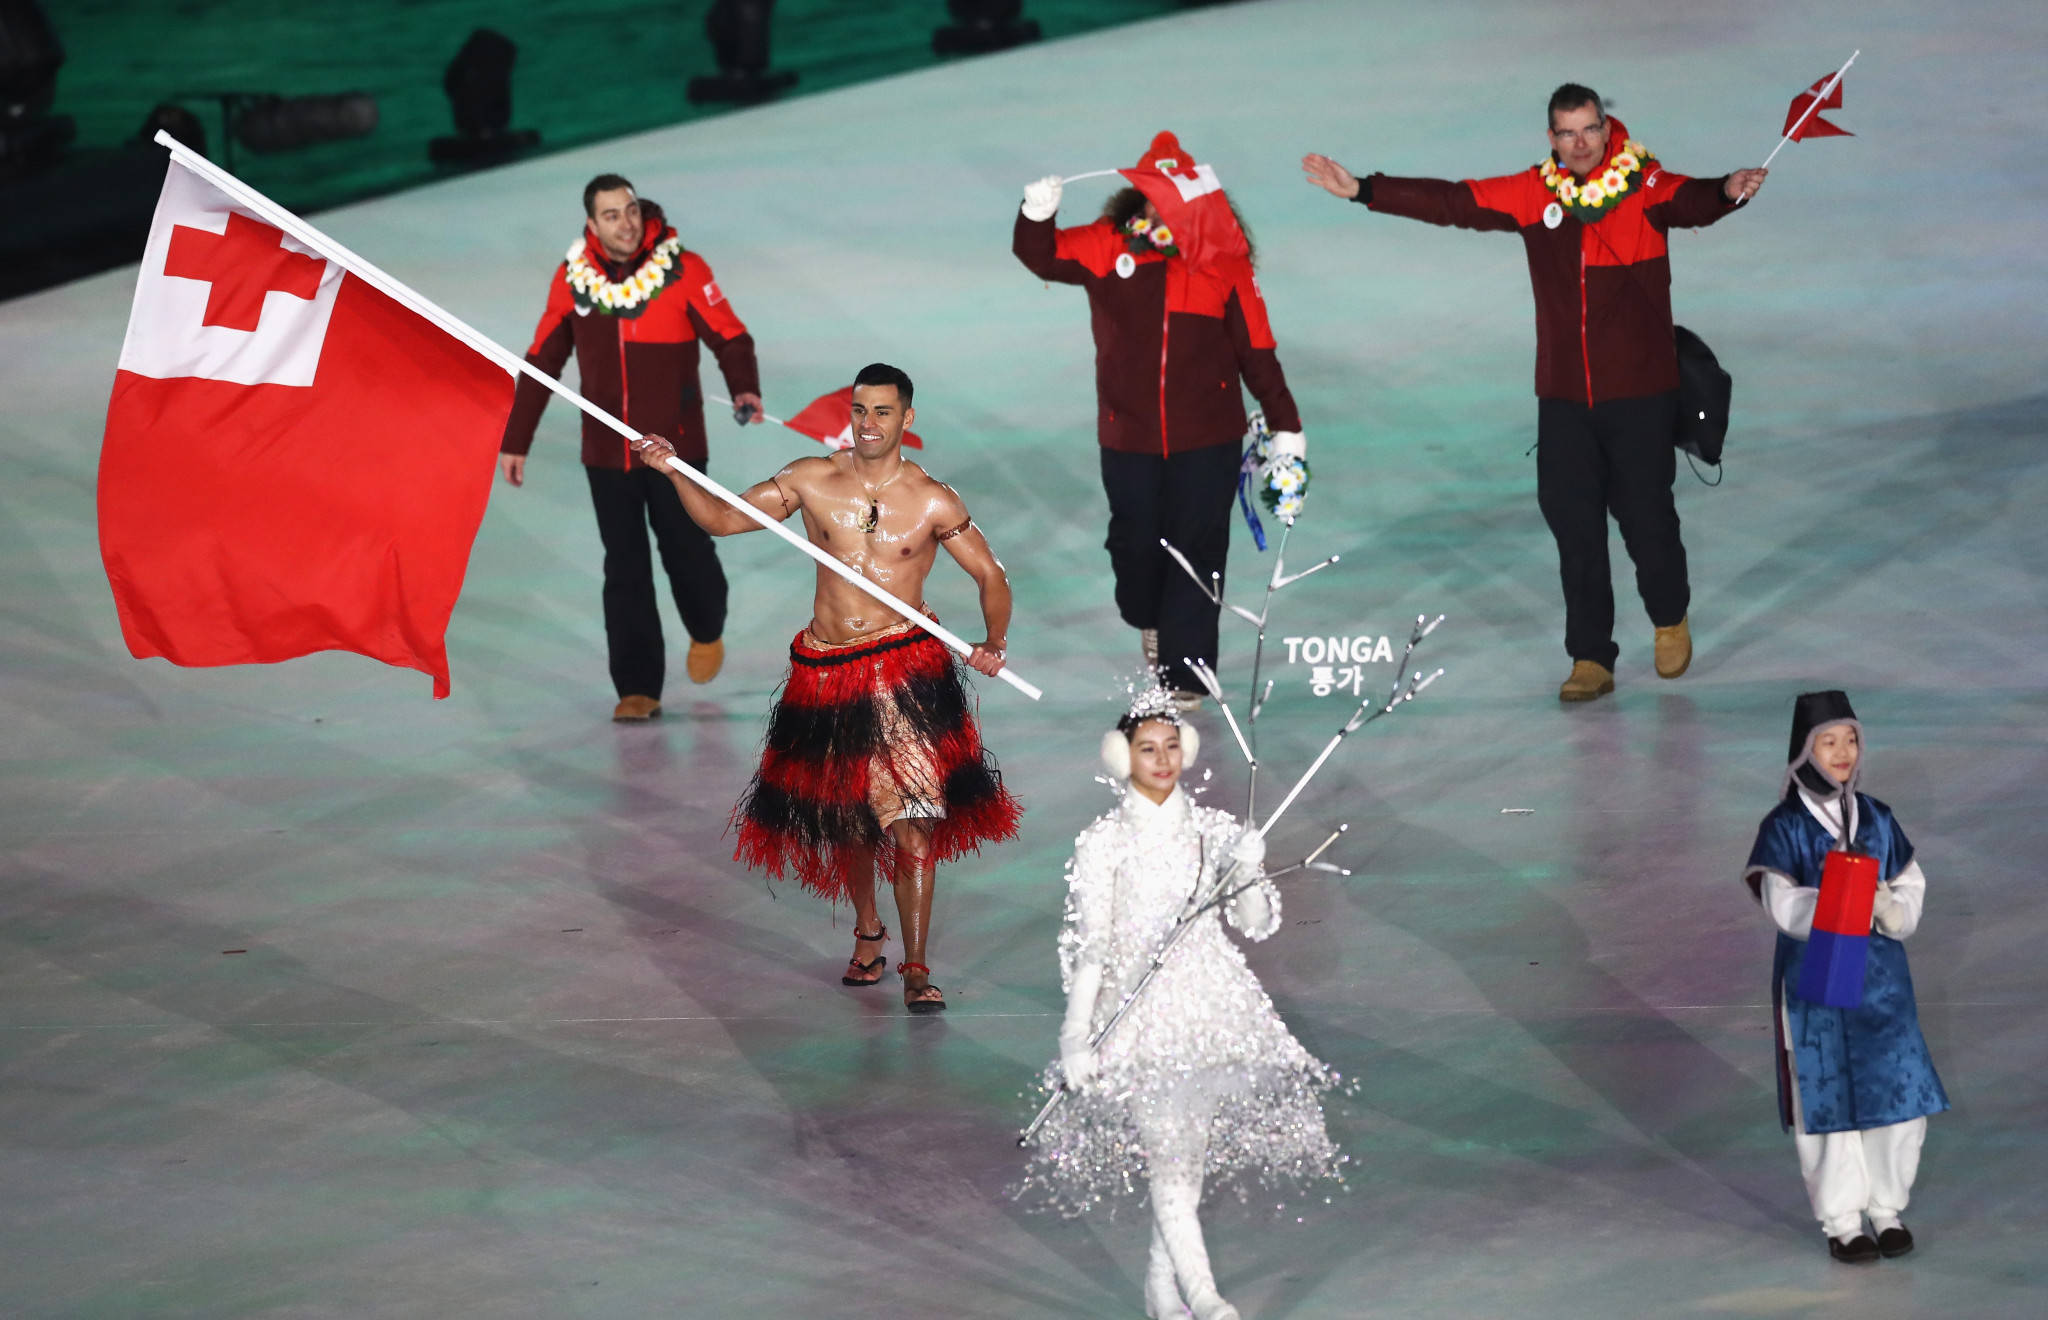 Tonga flagbearer Pita Taufatofua marched topless at the Opening Ceremony after doing the same at Rio 2016 ©Getty Images